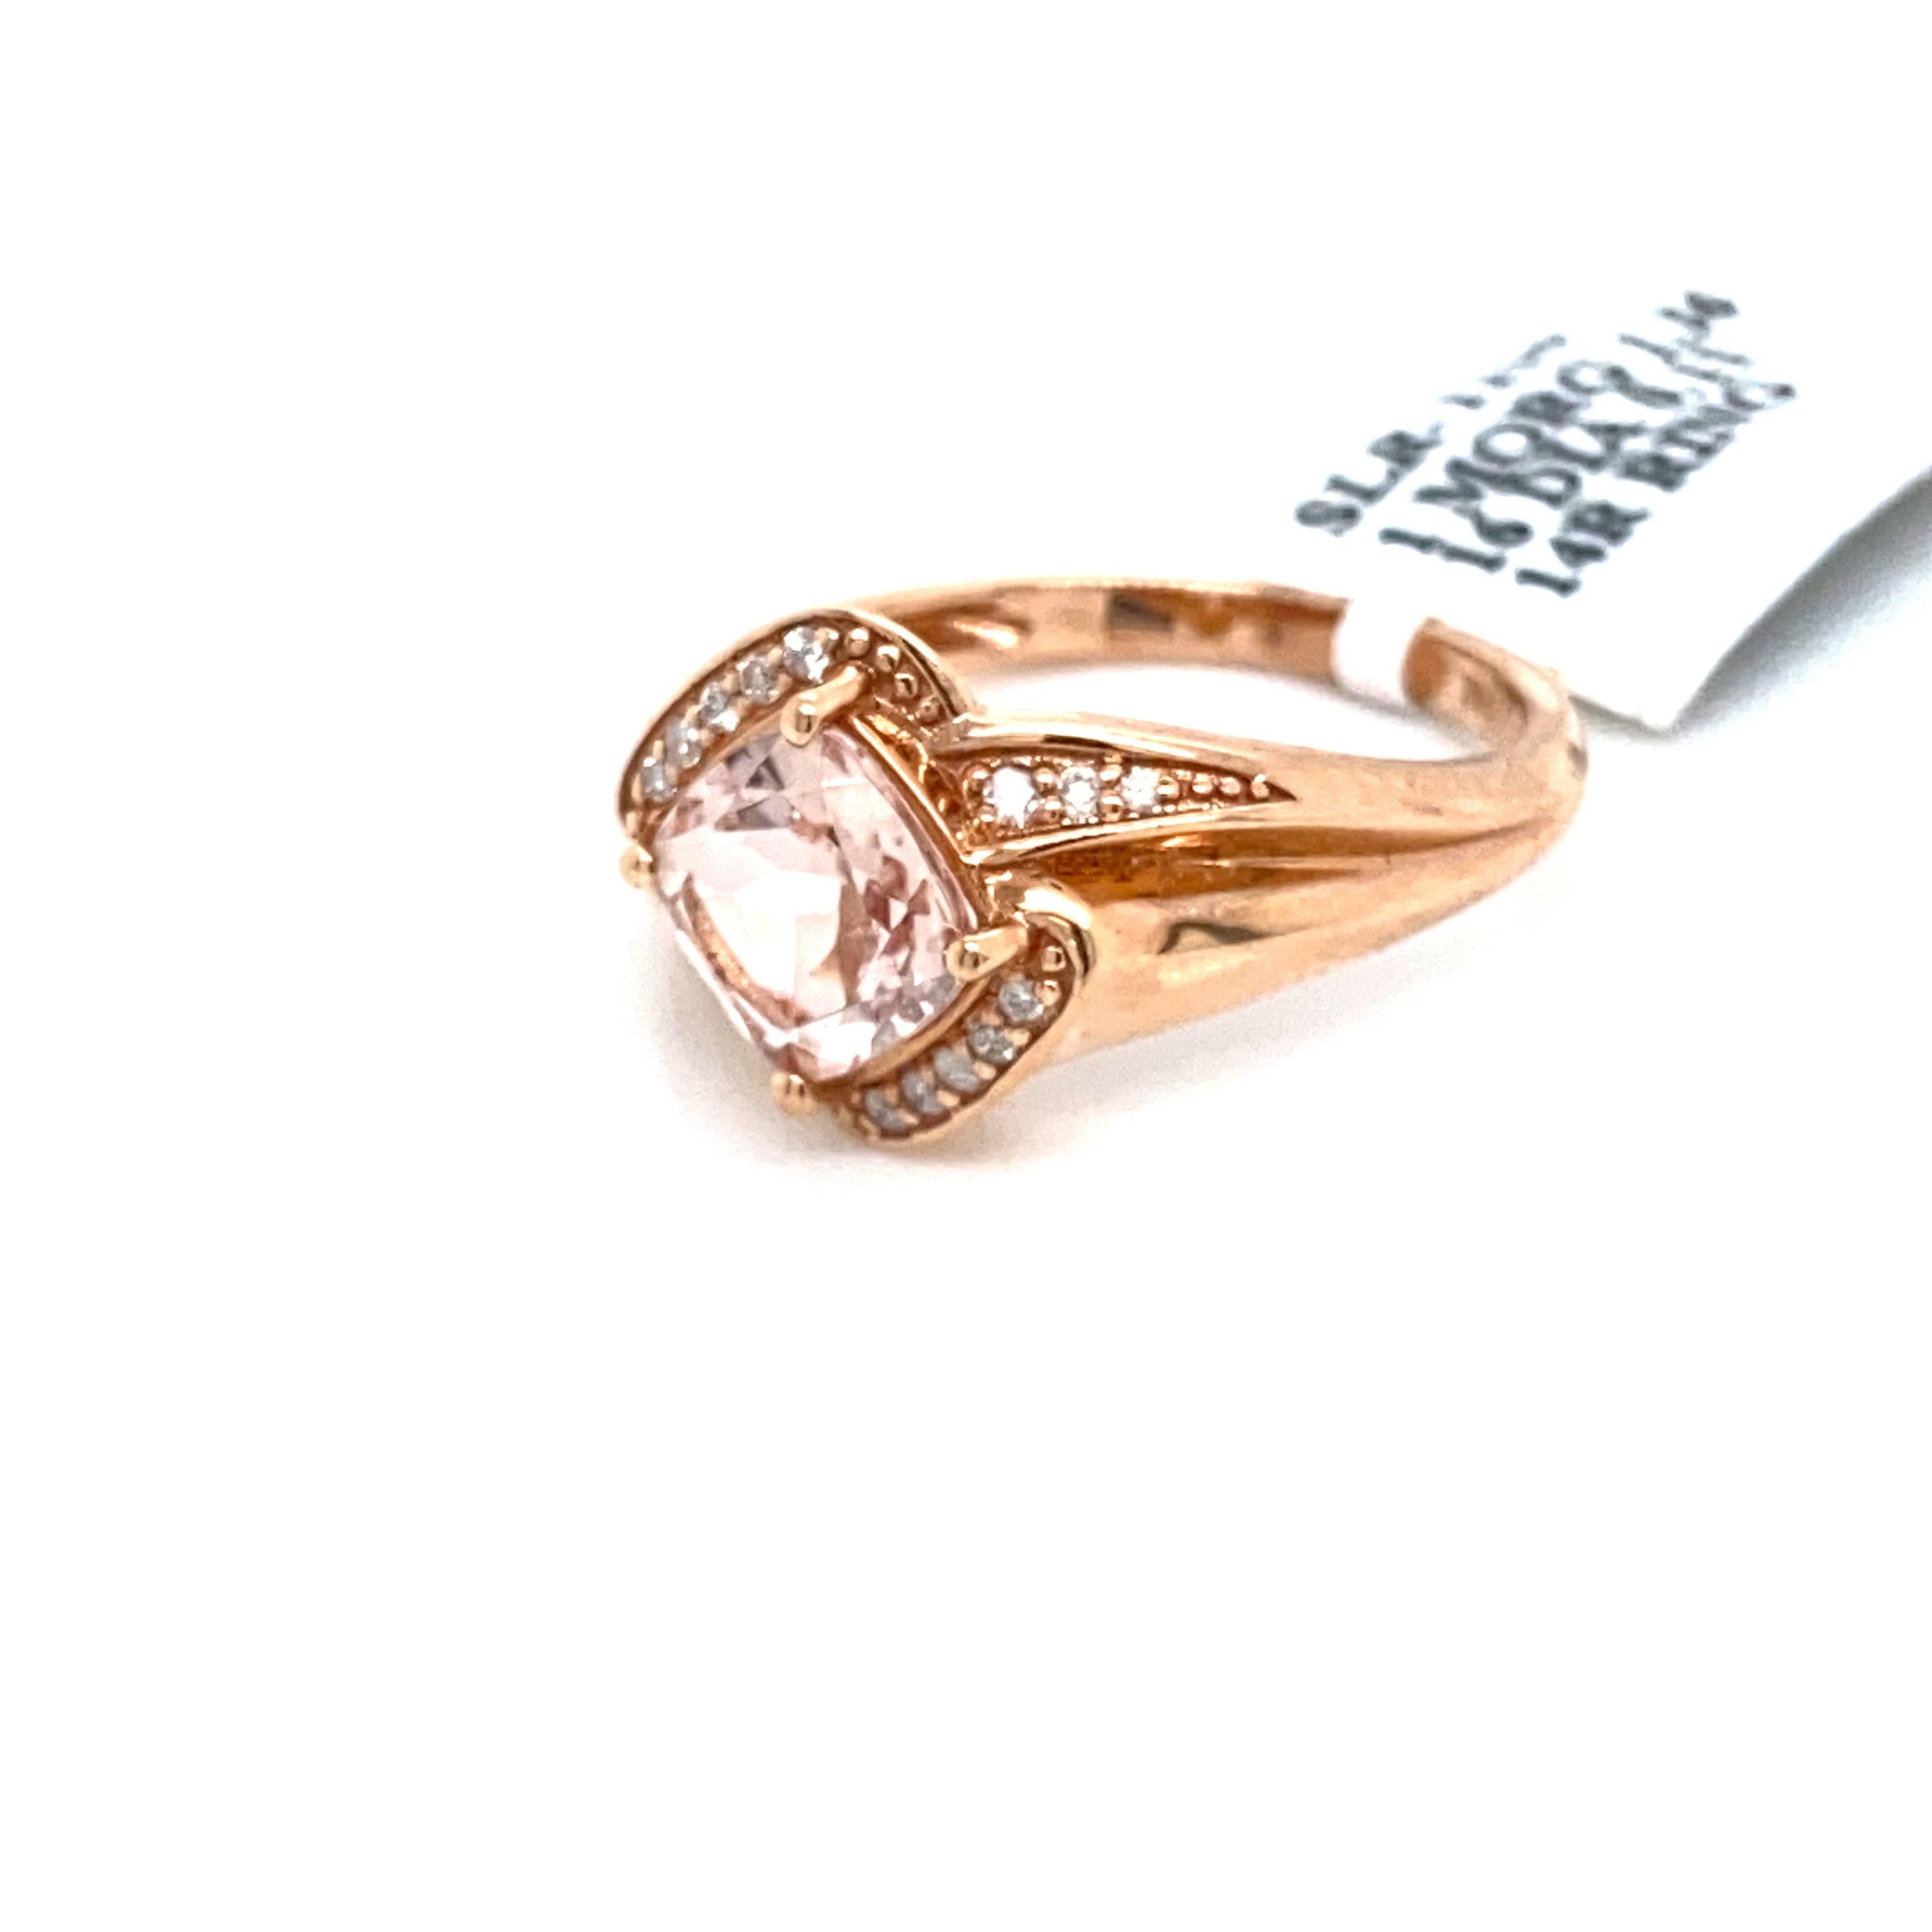 This stunning and antique natural morganite and diamond ring set is in solid 14K rose gold. The natural 1.36 Ct Cushion cut morganite has an excellent peachy pink color and is surrounded by alternating stripes of round cut white diamonds. The ring